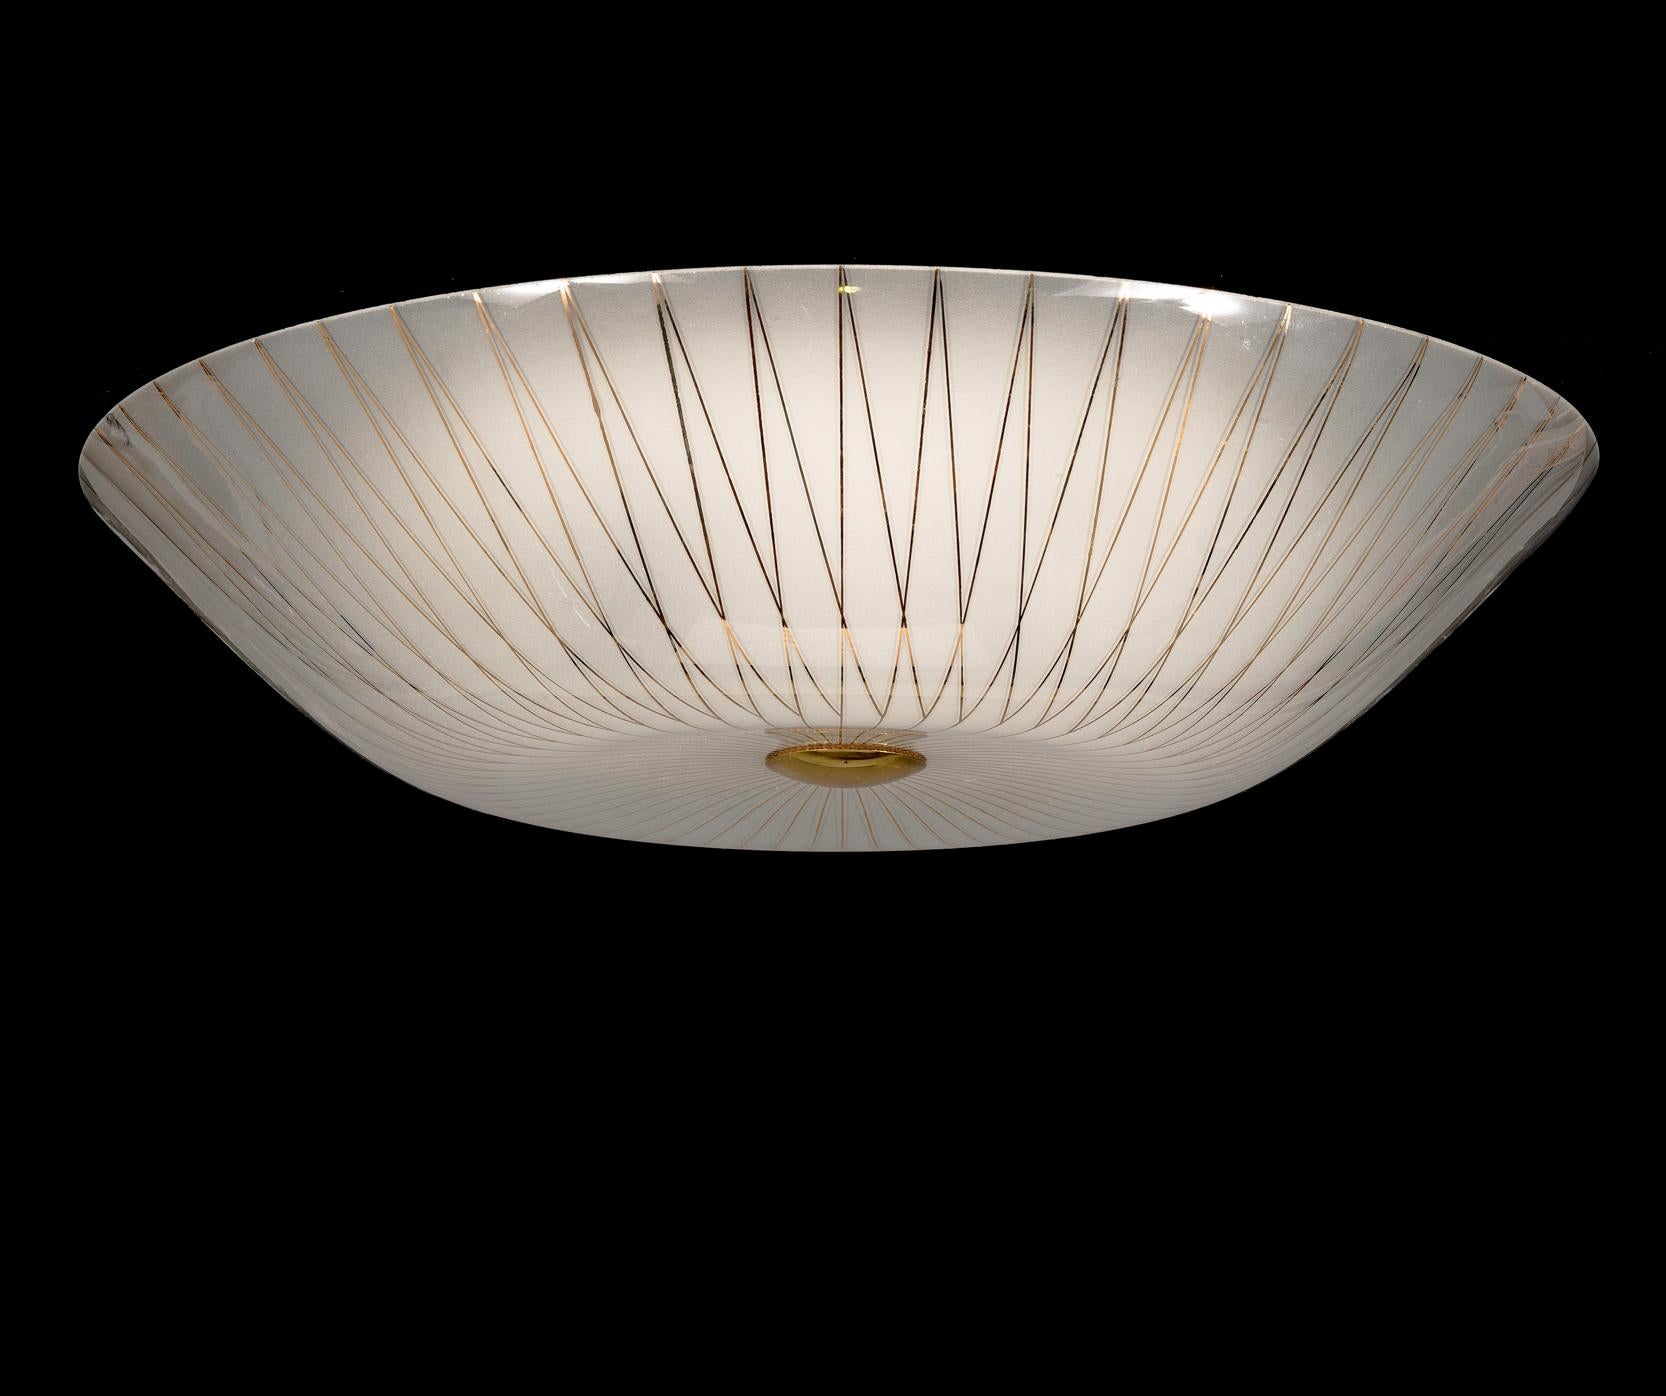 A ceiling light designed by Lisa Johansson-Pape, Model 71-005' Manufactured by Orno, Finland Circa 1950th.

Frosted glass shade with gilded decorations. For three lights. Manufacturer label. Diameter 55 cm.

Rewiring available upon request.
 